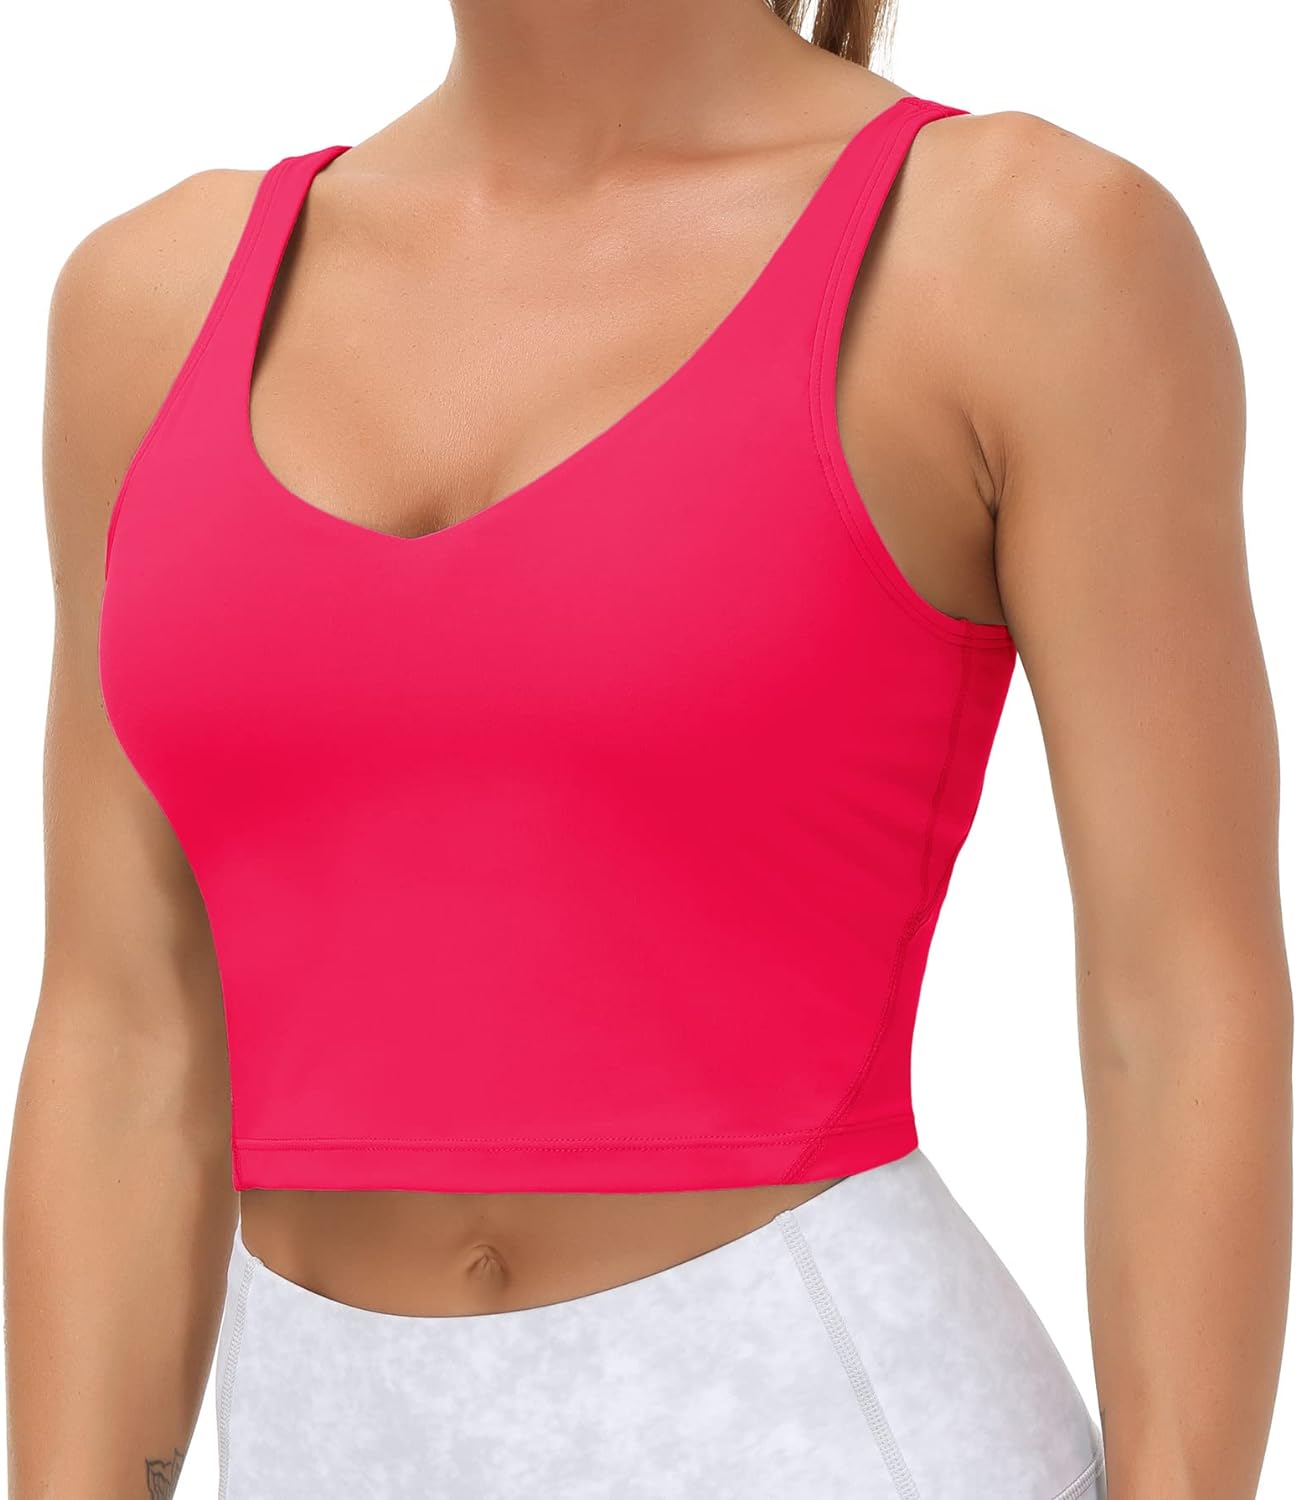 THE GYM PEOPLE Womens' Sports Bra Longline Wirefree Padded with Medium  Support s